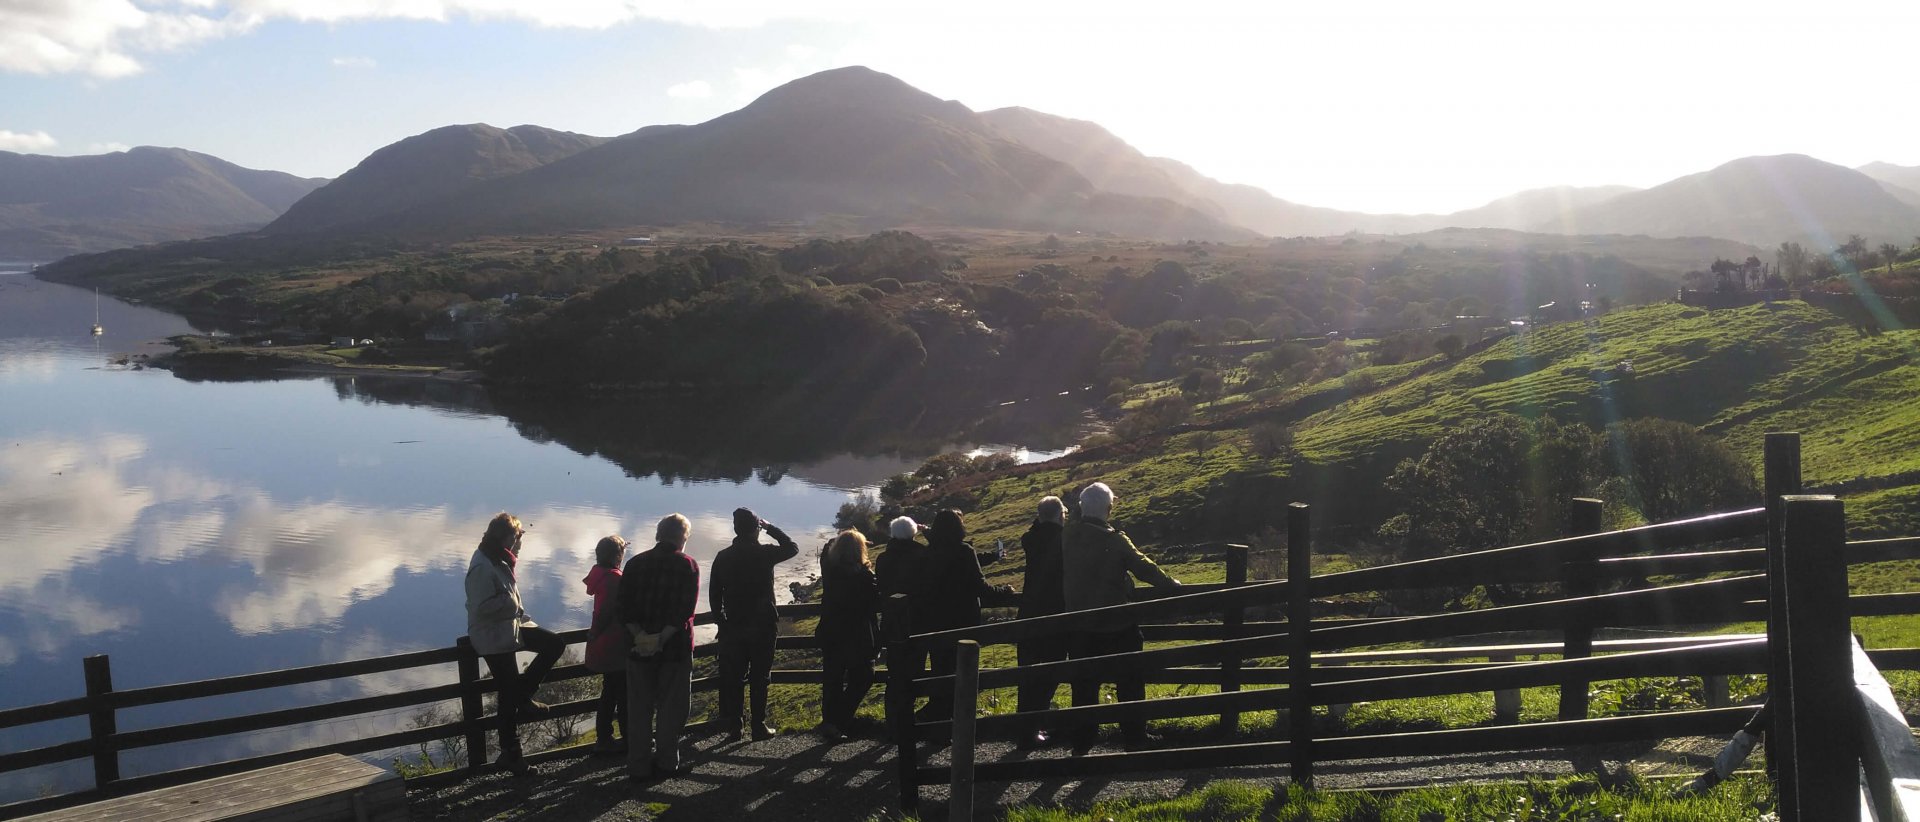 Driftwood Tour Group gazing out over scenic Killary Harbour/Fjord from Tom Nee's sheep farm in Ireland